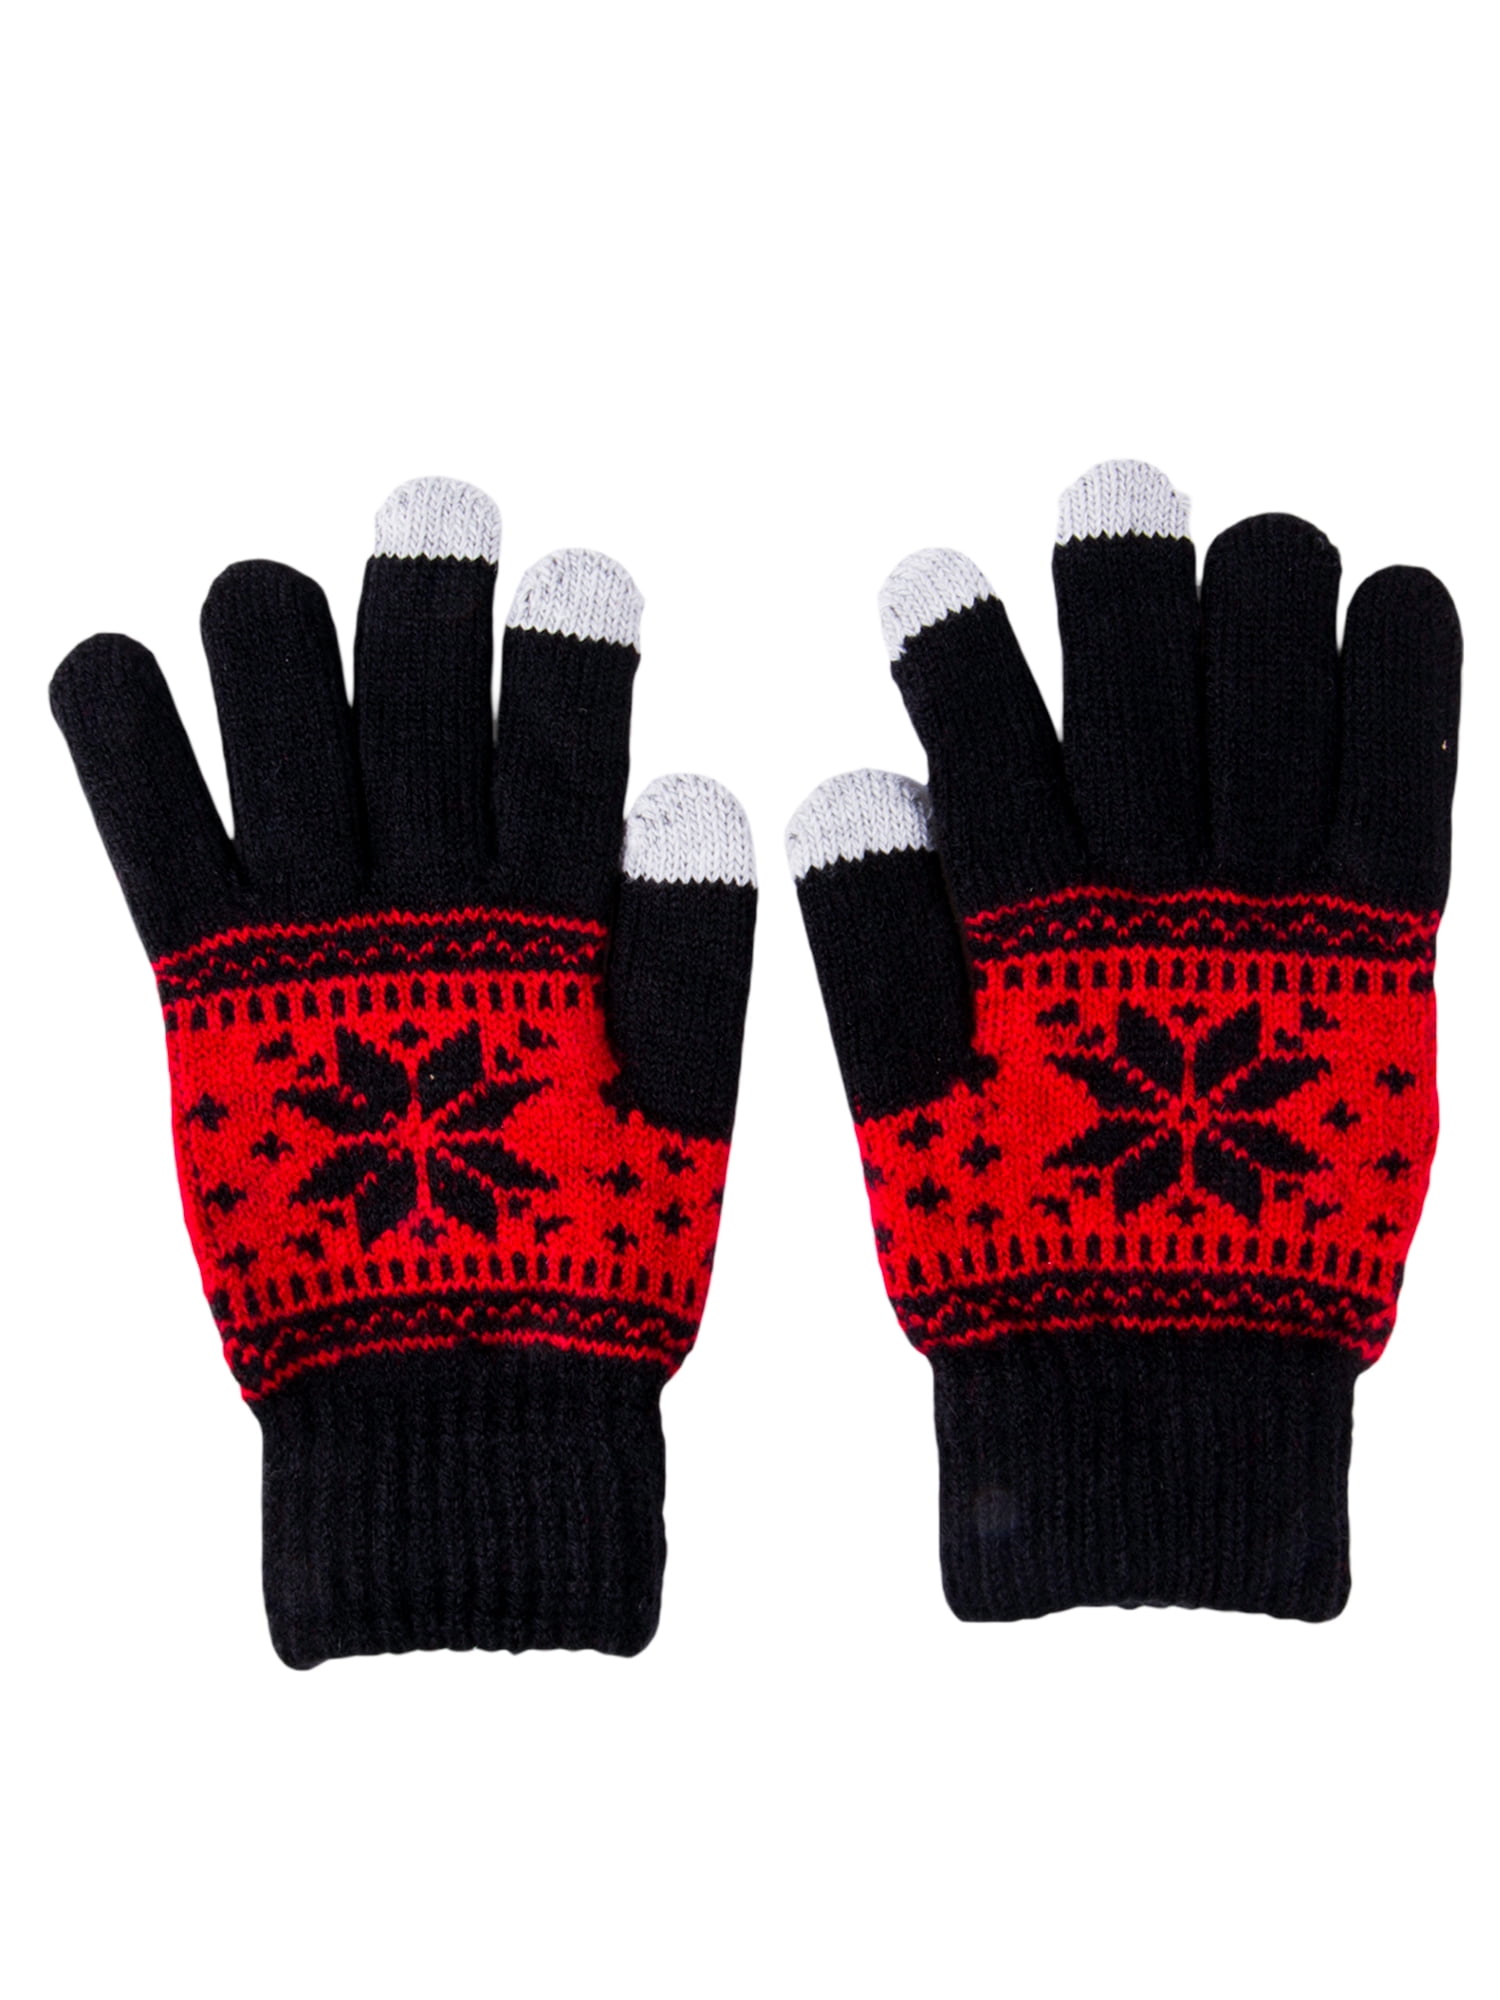 NEW Ladies Winter Mittens Warm Snowflake Fleece Lined Thick Knit Ski Gloves Soft